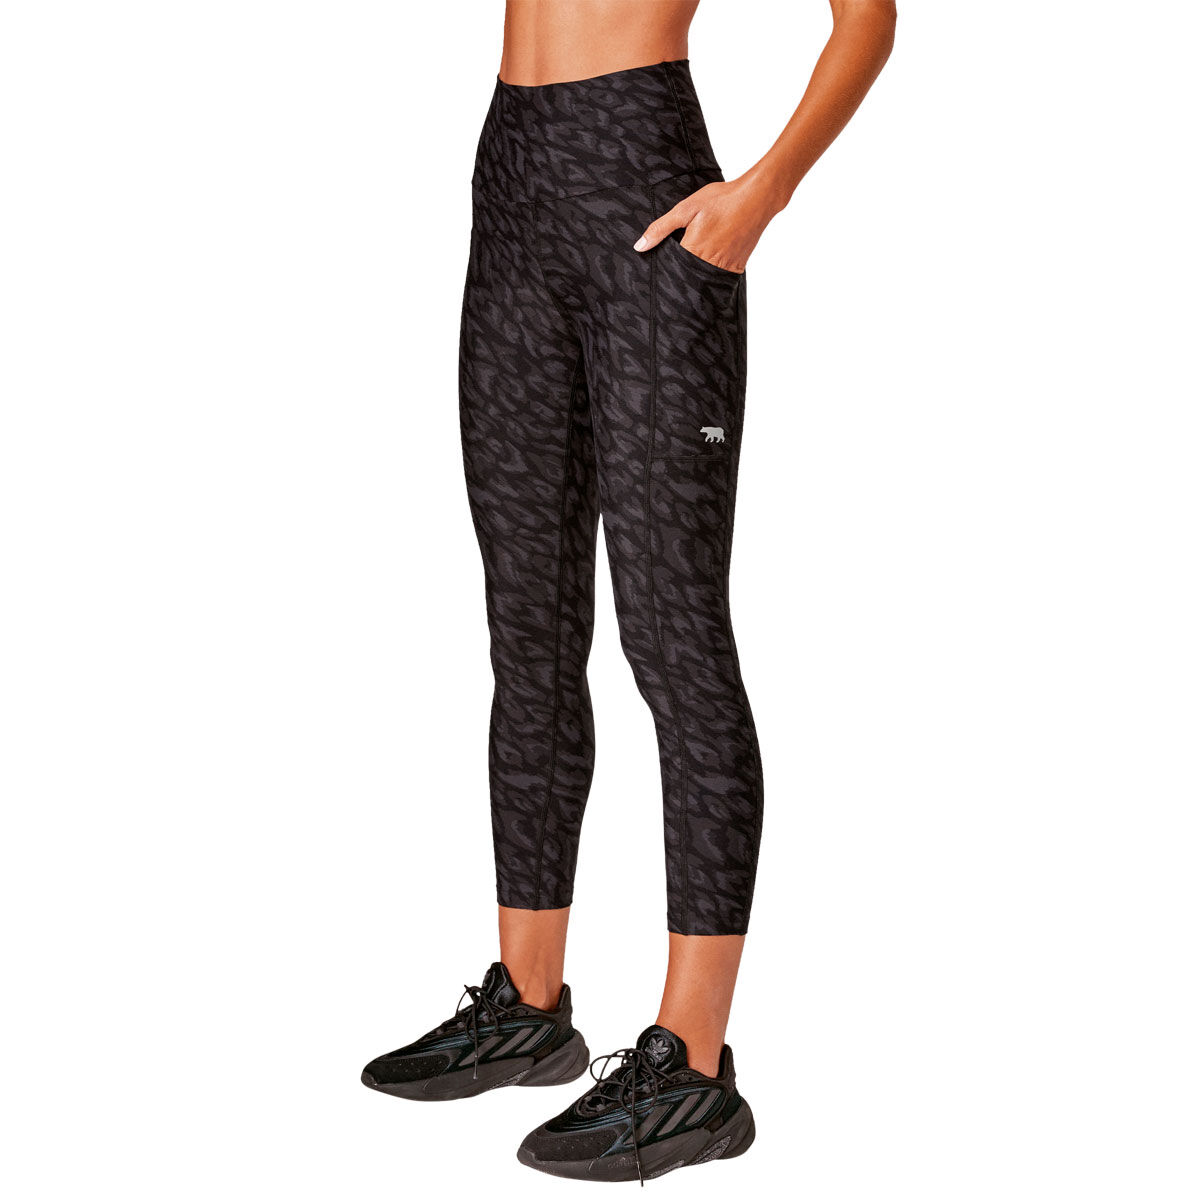 Running Bare High Rise Full Length Tight Womens - Buy Online - Ph:  1800-370-766 - AfterPay & ZipPay Available!